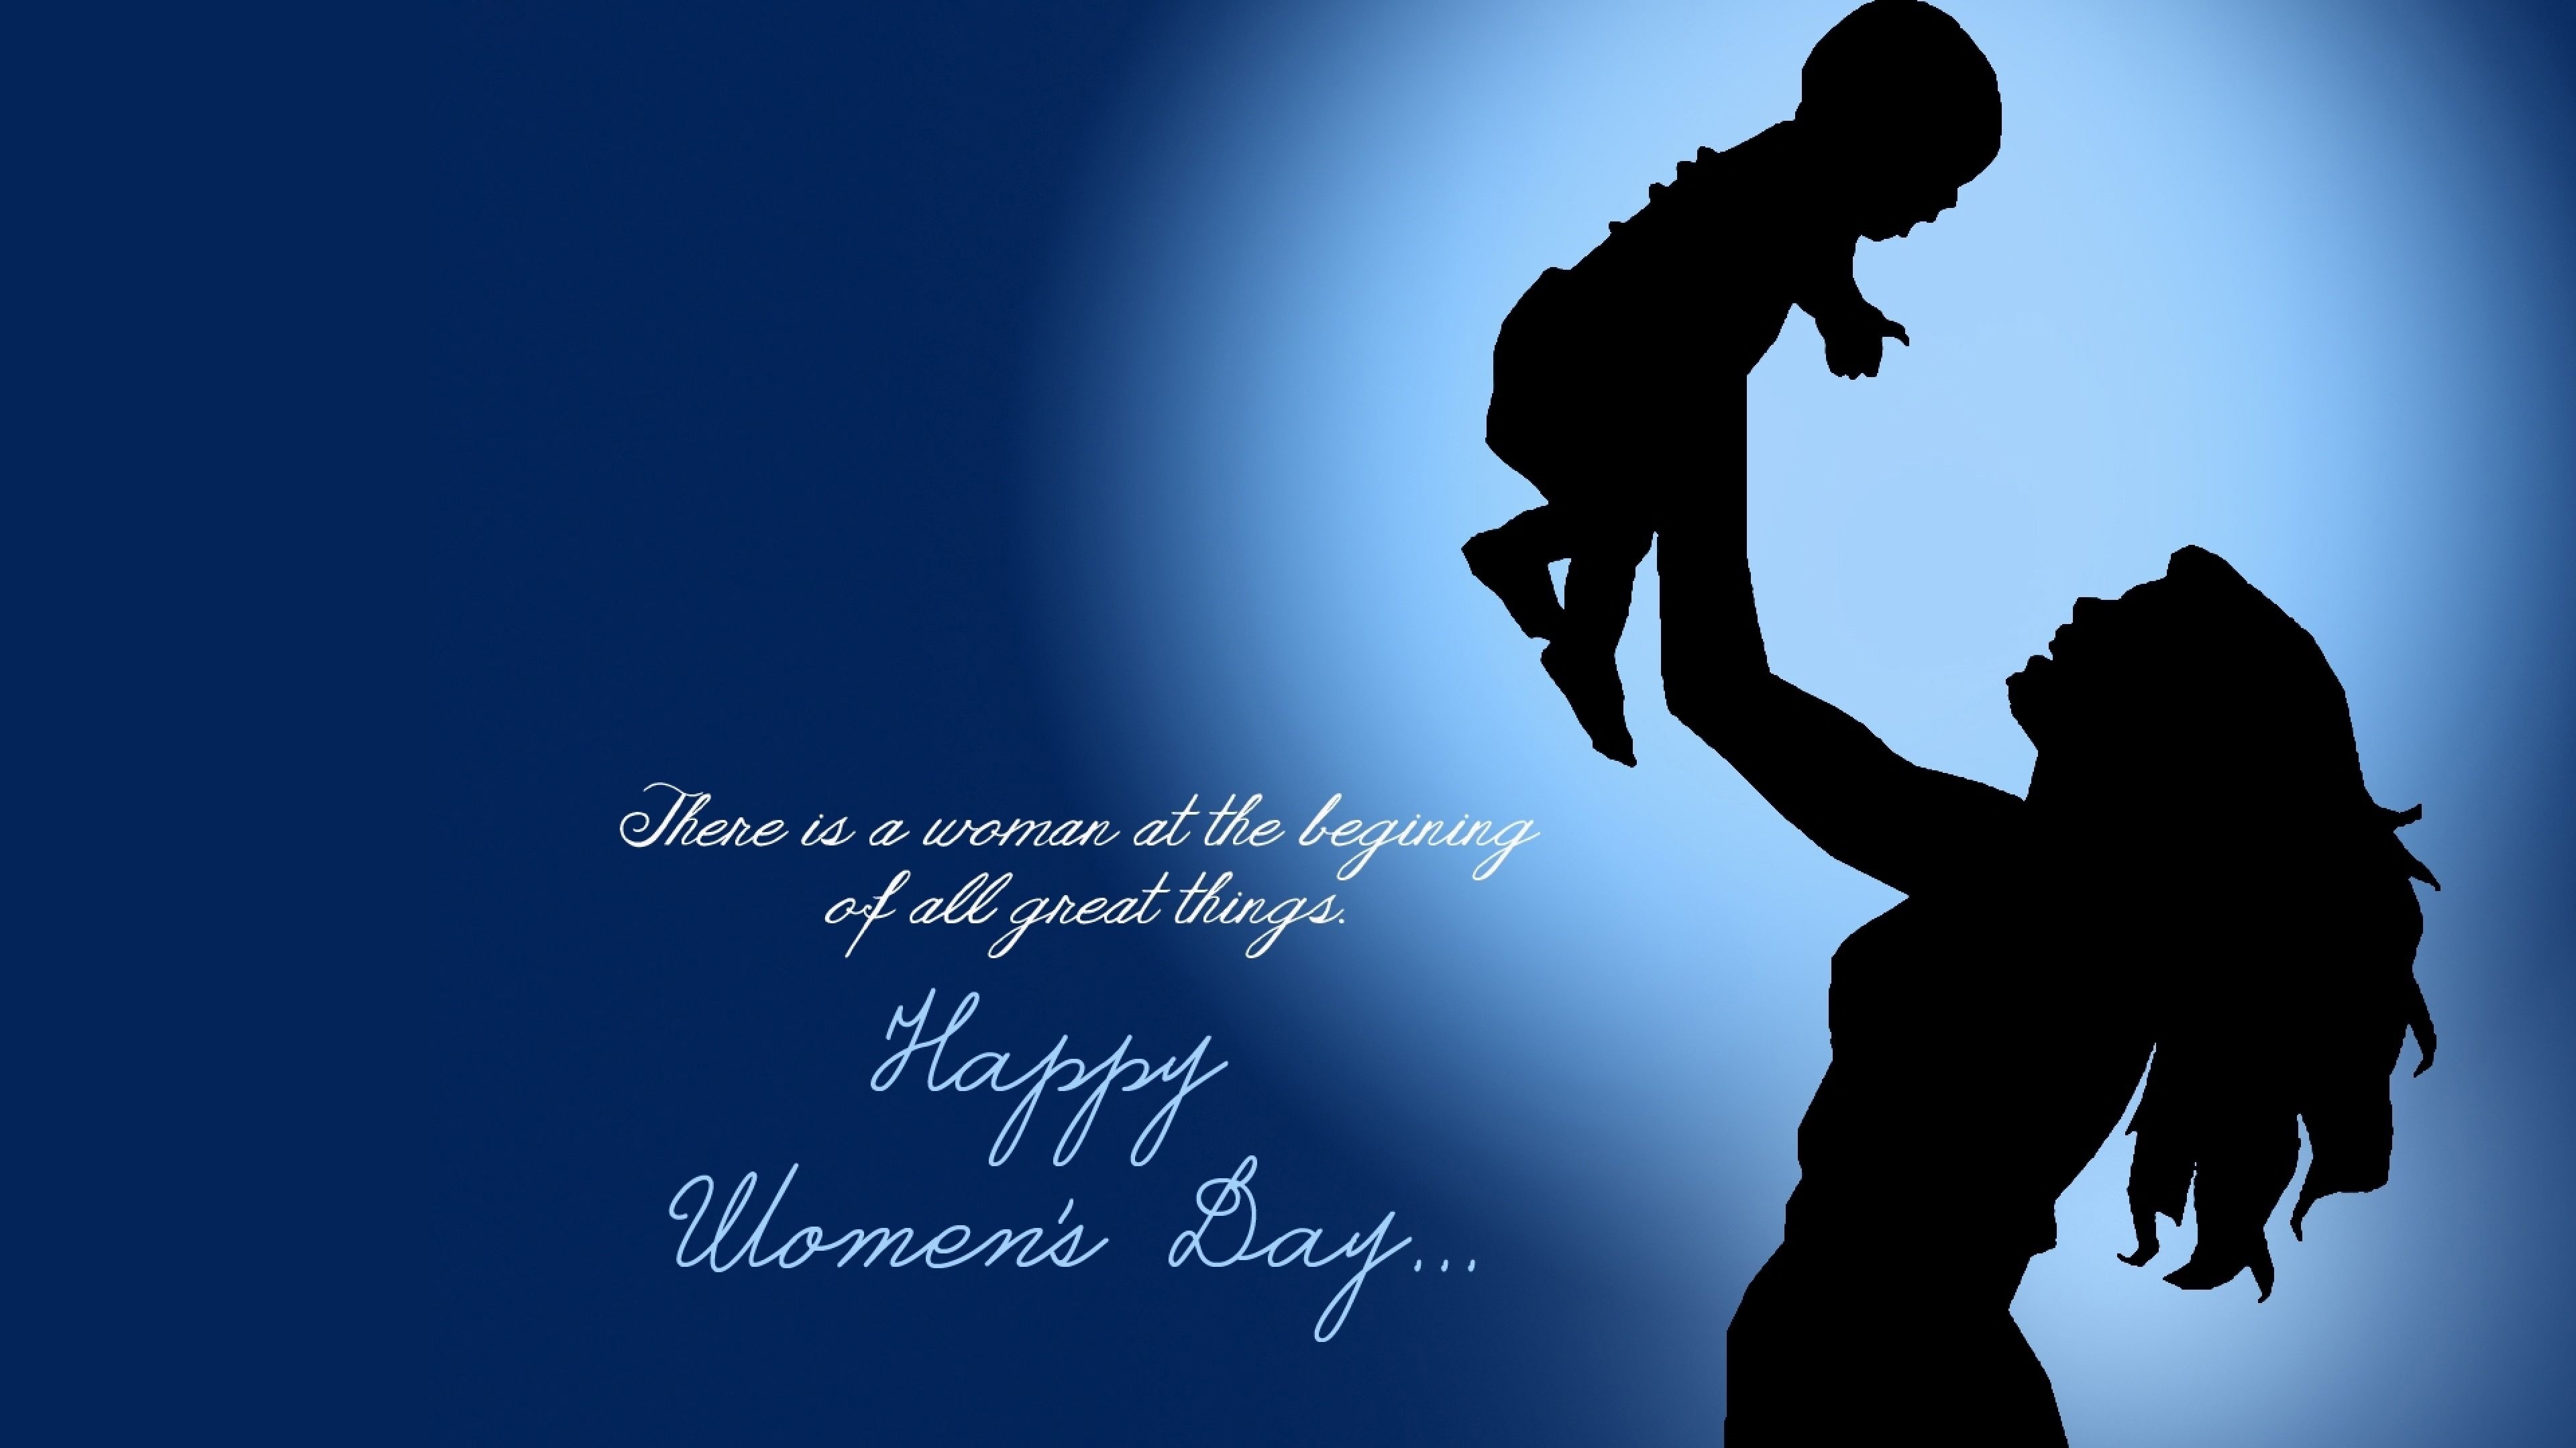 Happy Women's Day 2016 sms wishes quotes greetings (4)